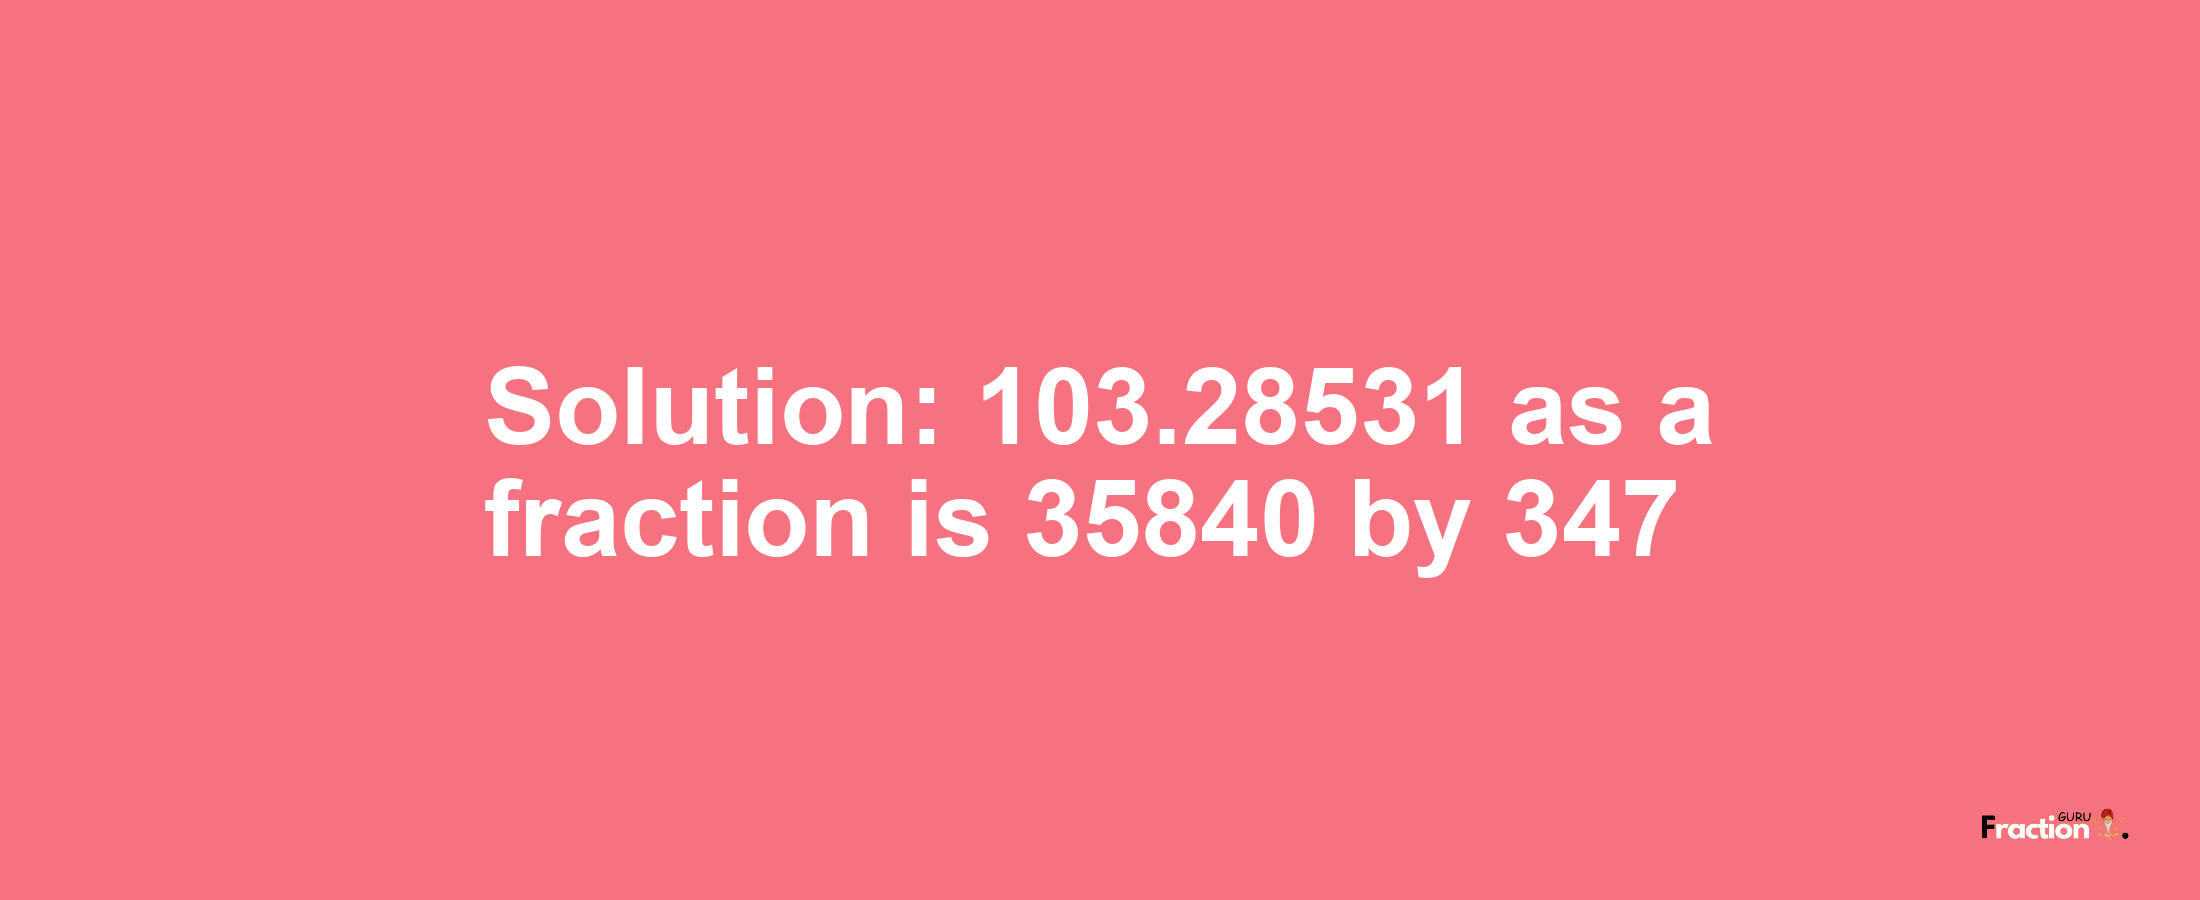 Solution:103.28531 as a fraction is 35840/347